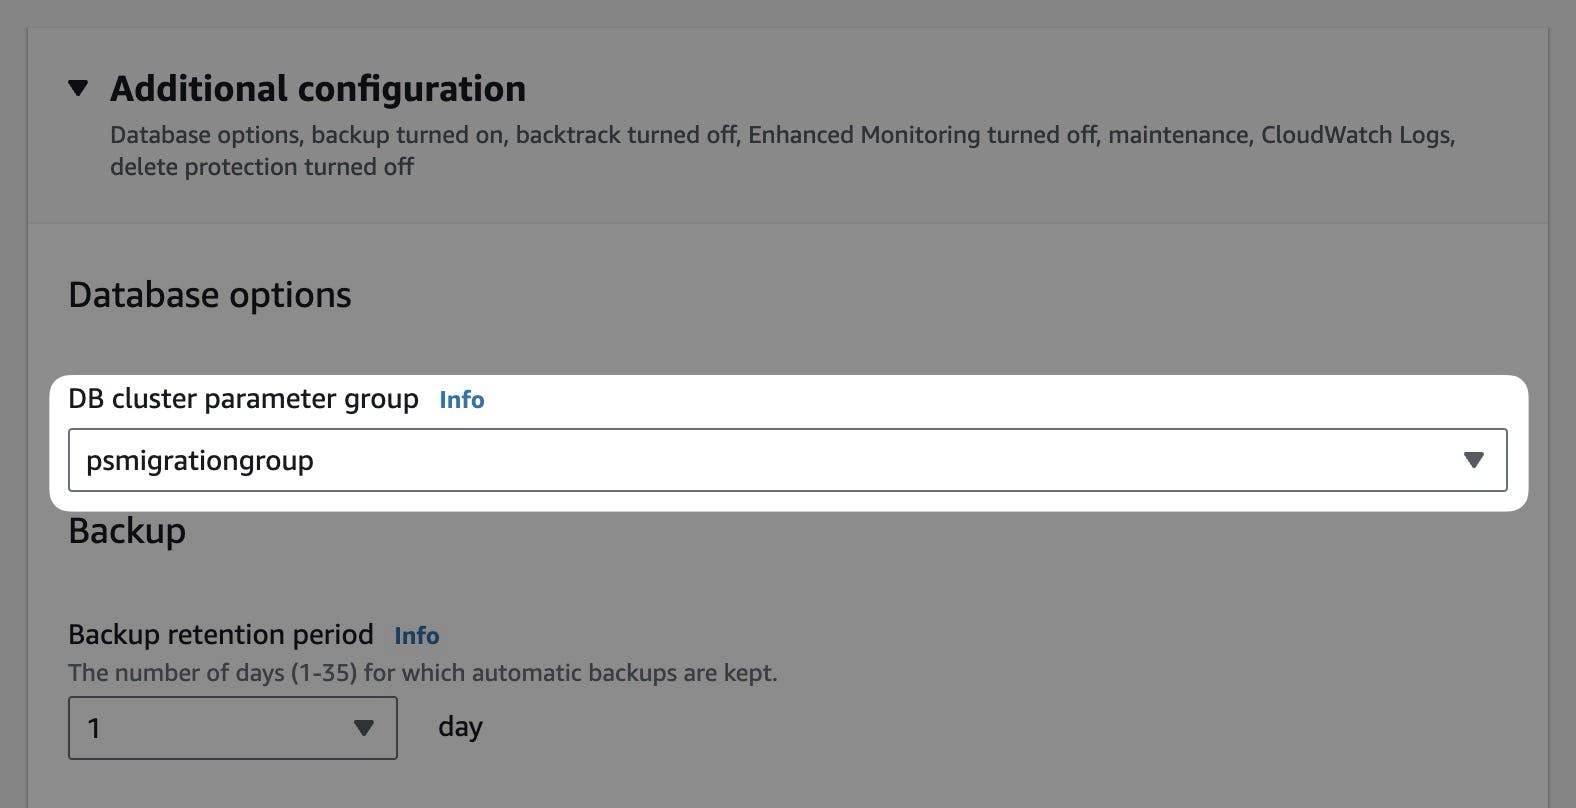 The Additional configuration section of the database configuration view.